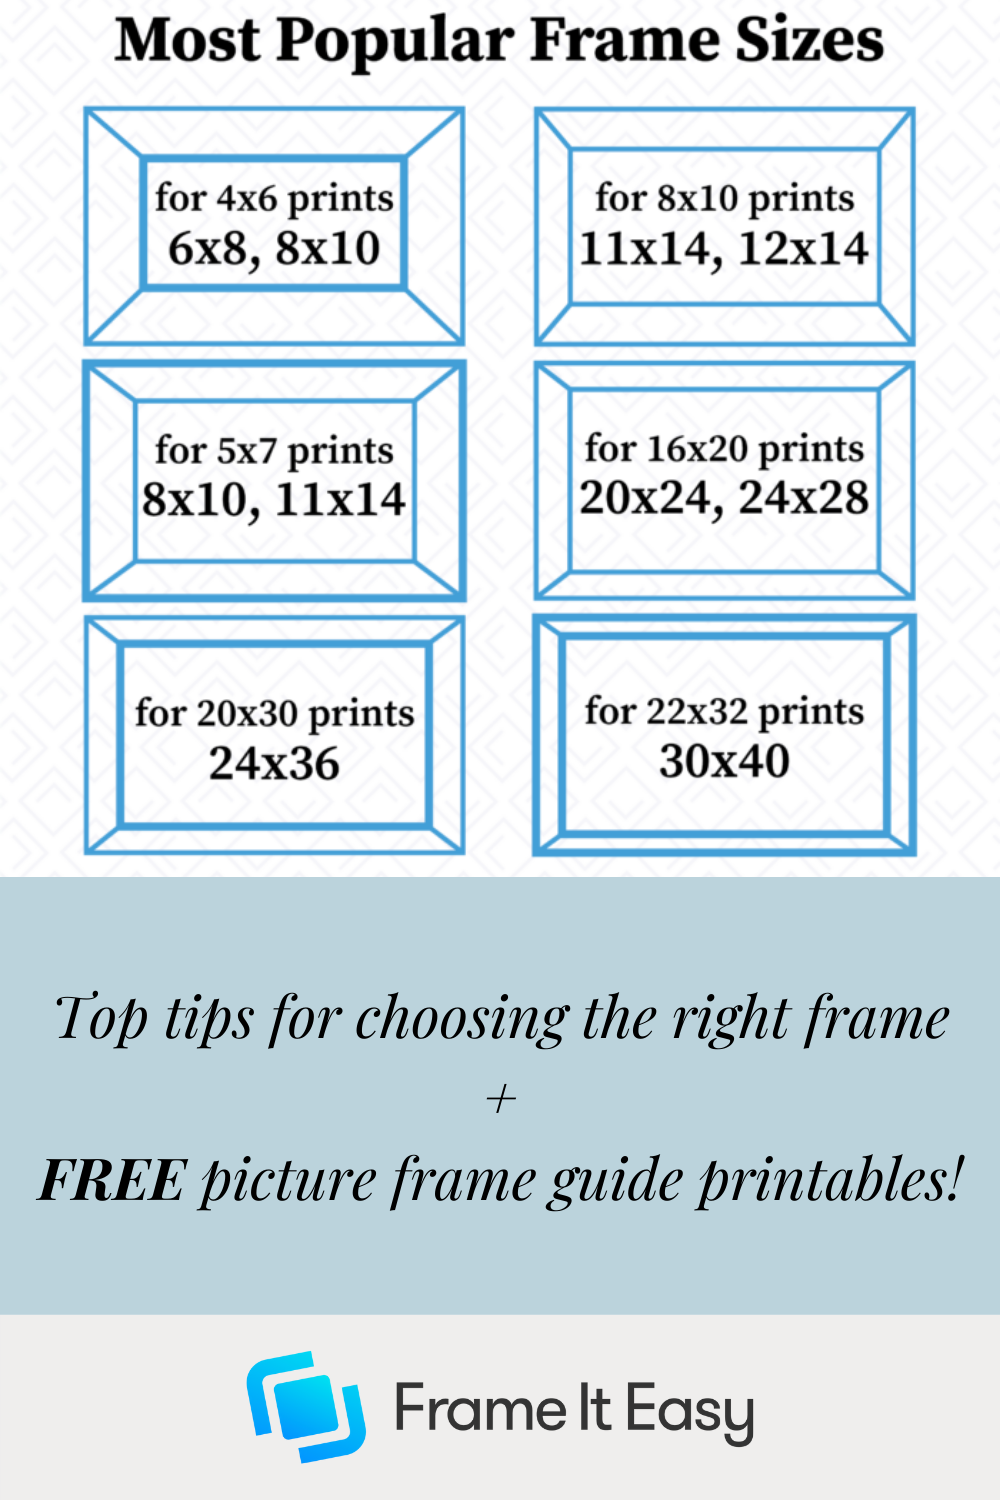 The Ultimate Guide to Standard Frame Sizes